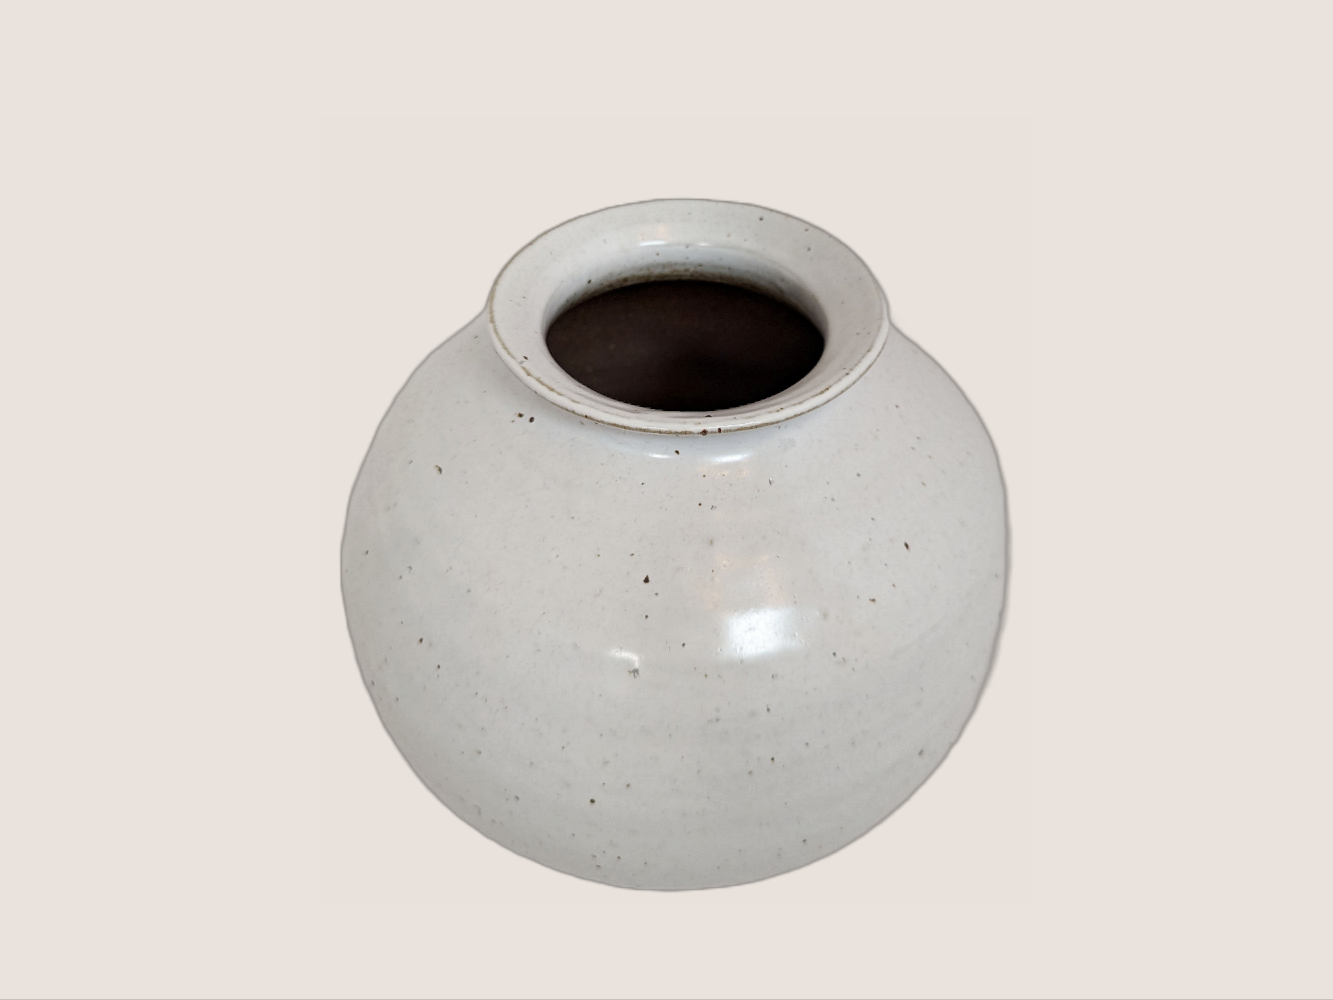 white ceramic vase in round shape, 8 inches tall and 8 inches wide at largest width, with 3.5 inch vase opening. Brown and black speckles give it natural texture and look. 